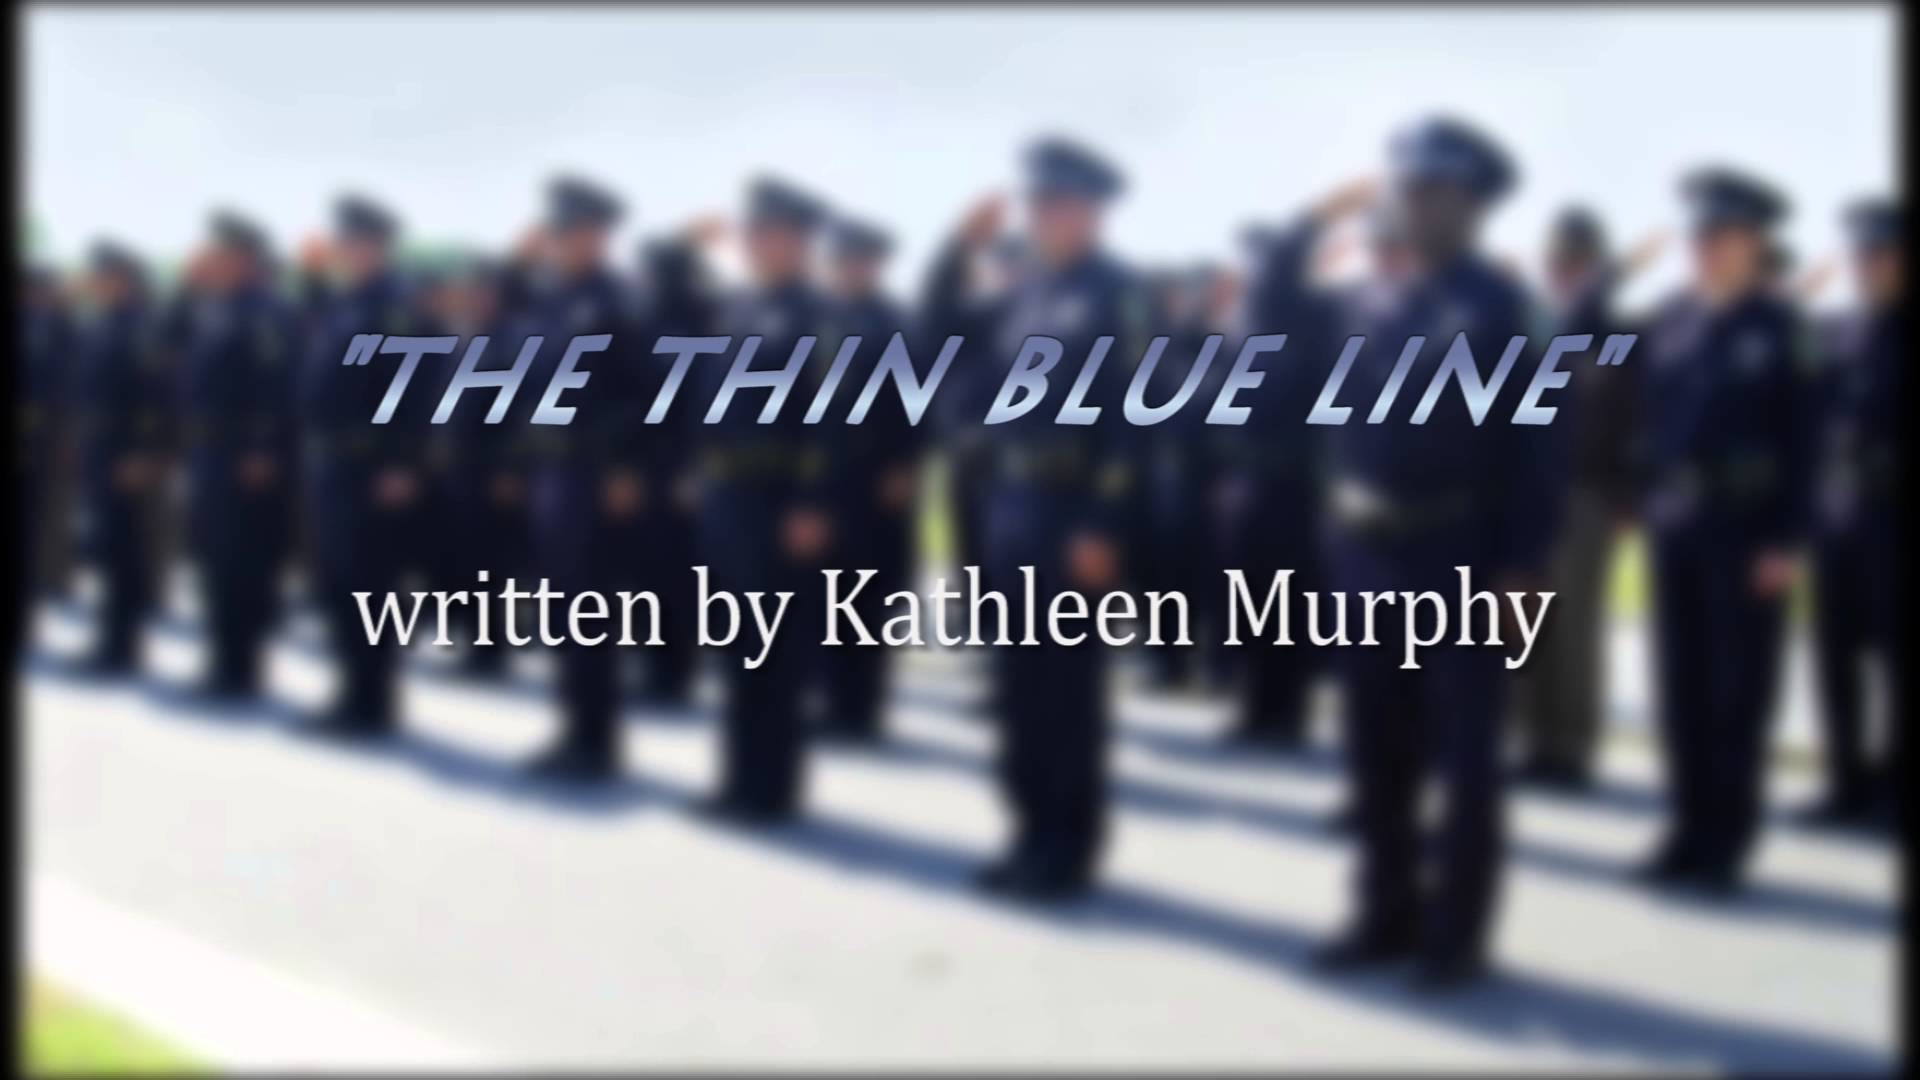 1920x1080 "The Thin Blue Line" by Kathleen Murphy